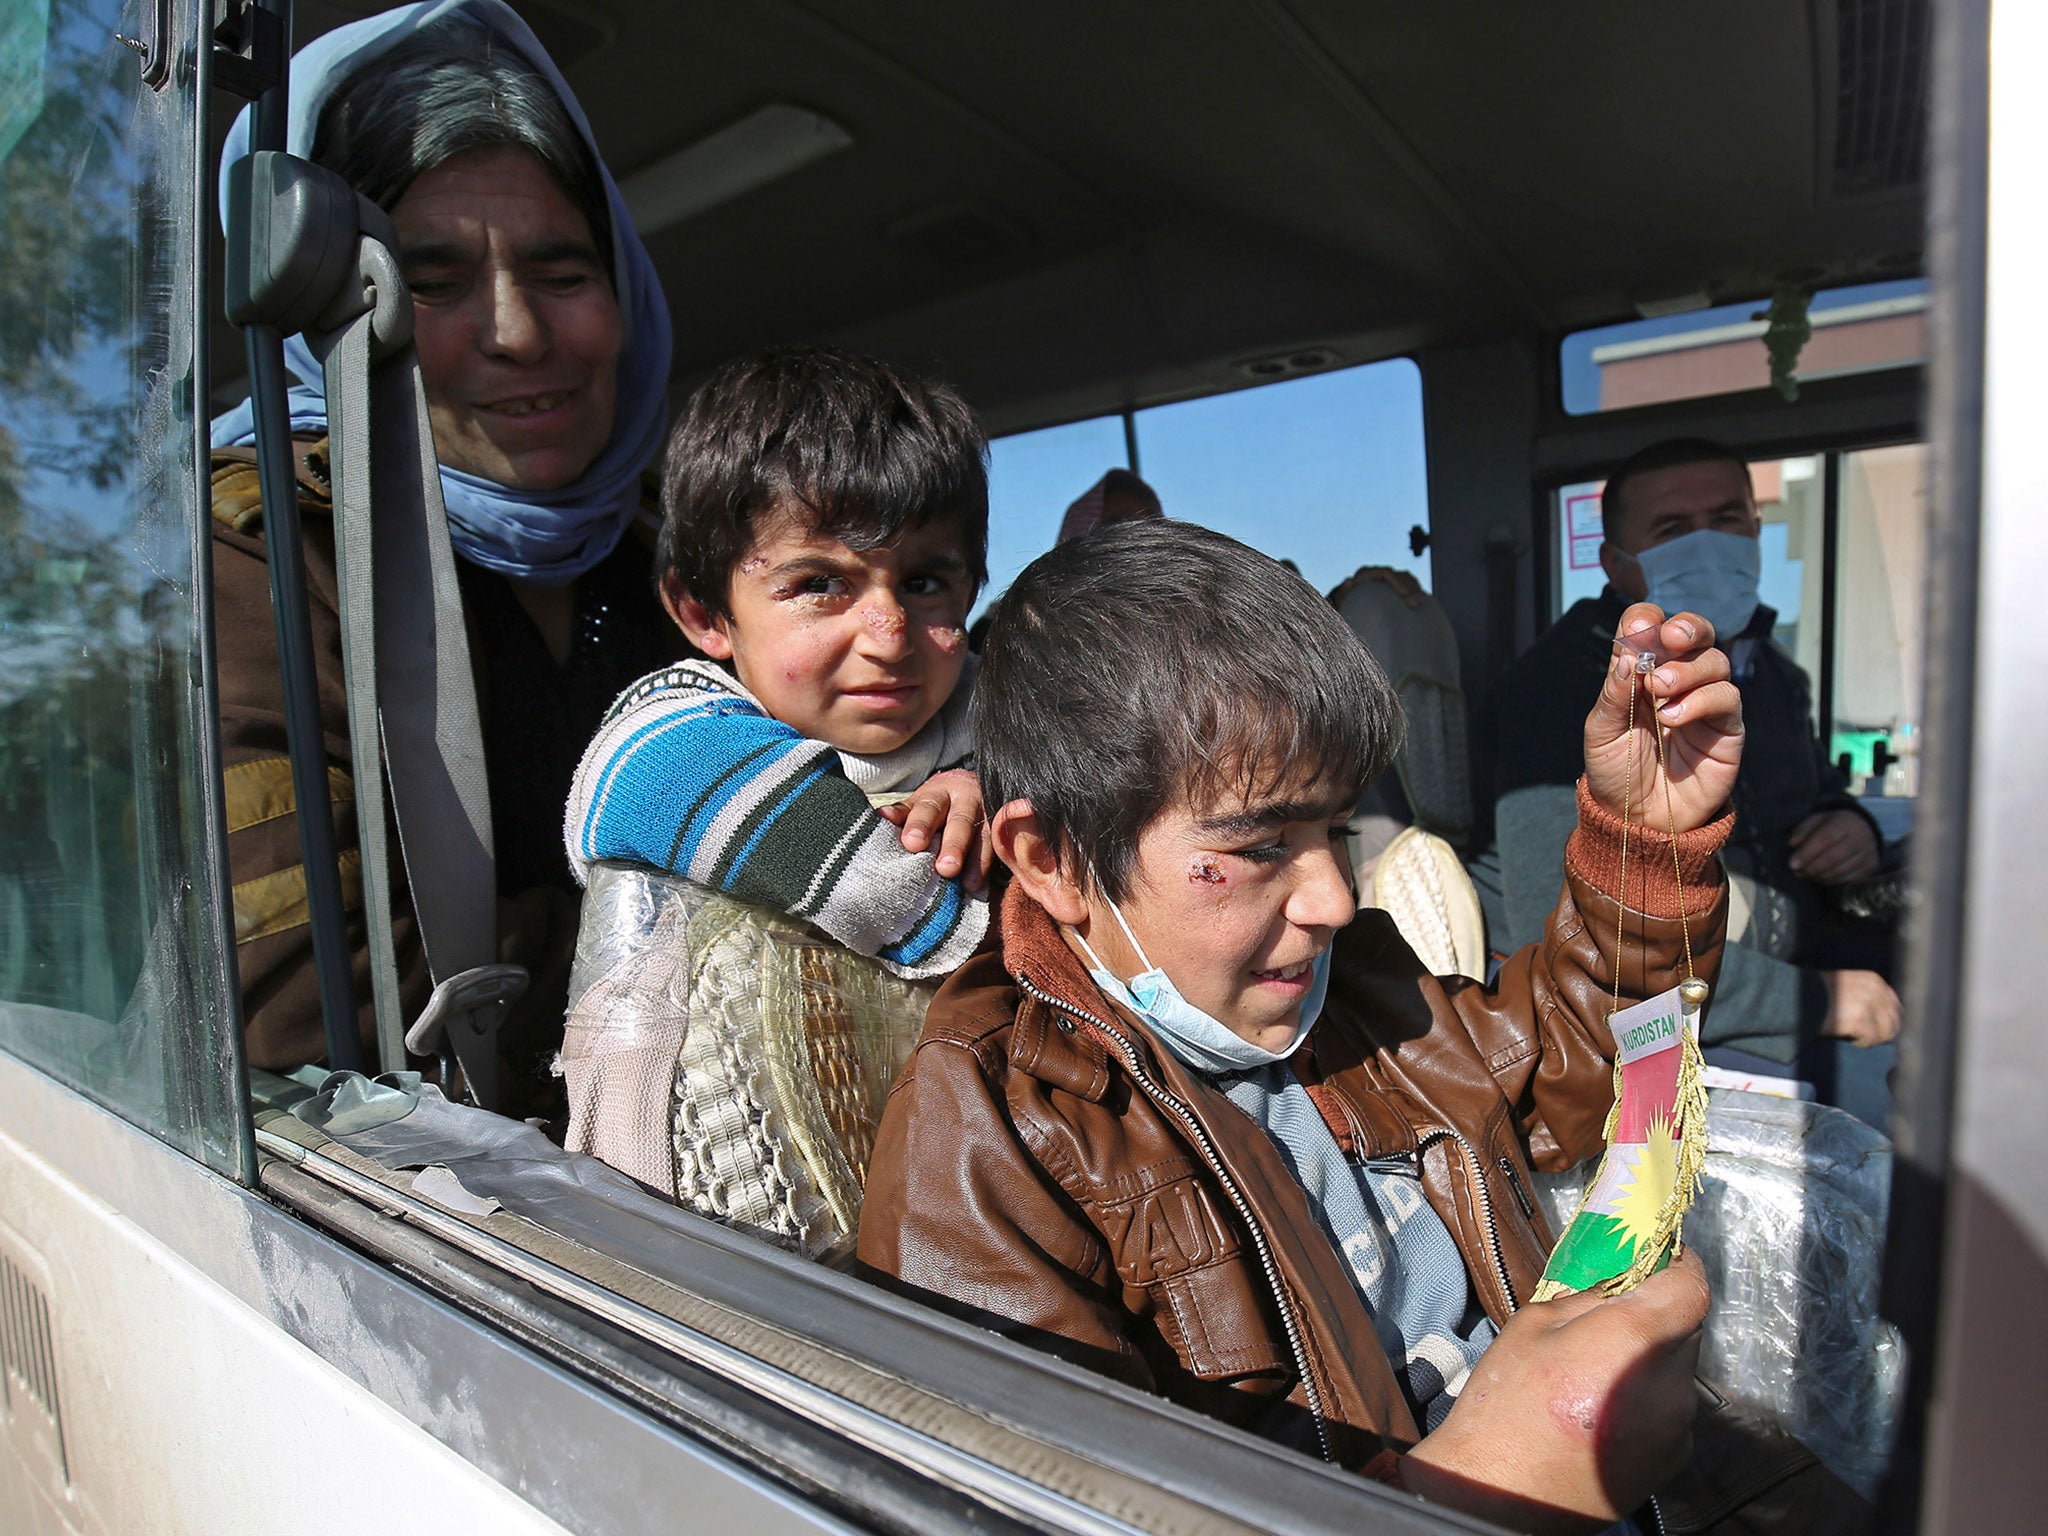 Two Yazidi boys, suffering from several infections from mosquito bites while held by the Islamic State group, wait with their mother inside a bus before being driven to the Kurdish city of Dohuk, in Alton Kupri, outside Kirkuk, Iraq. The Islamic State gro